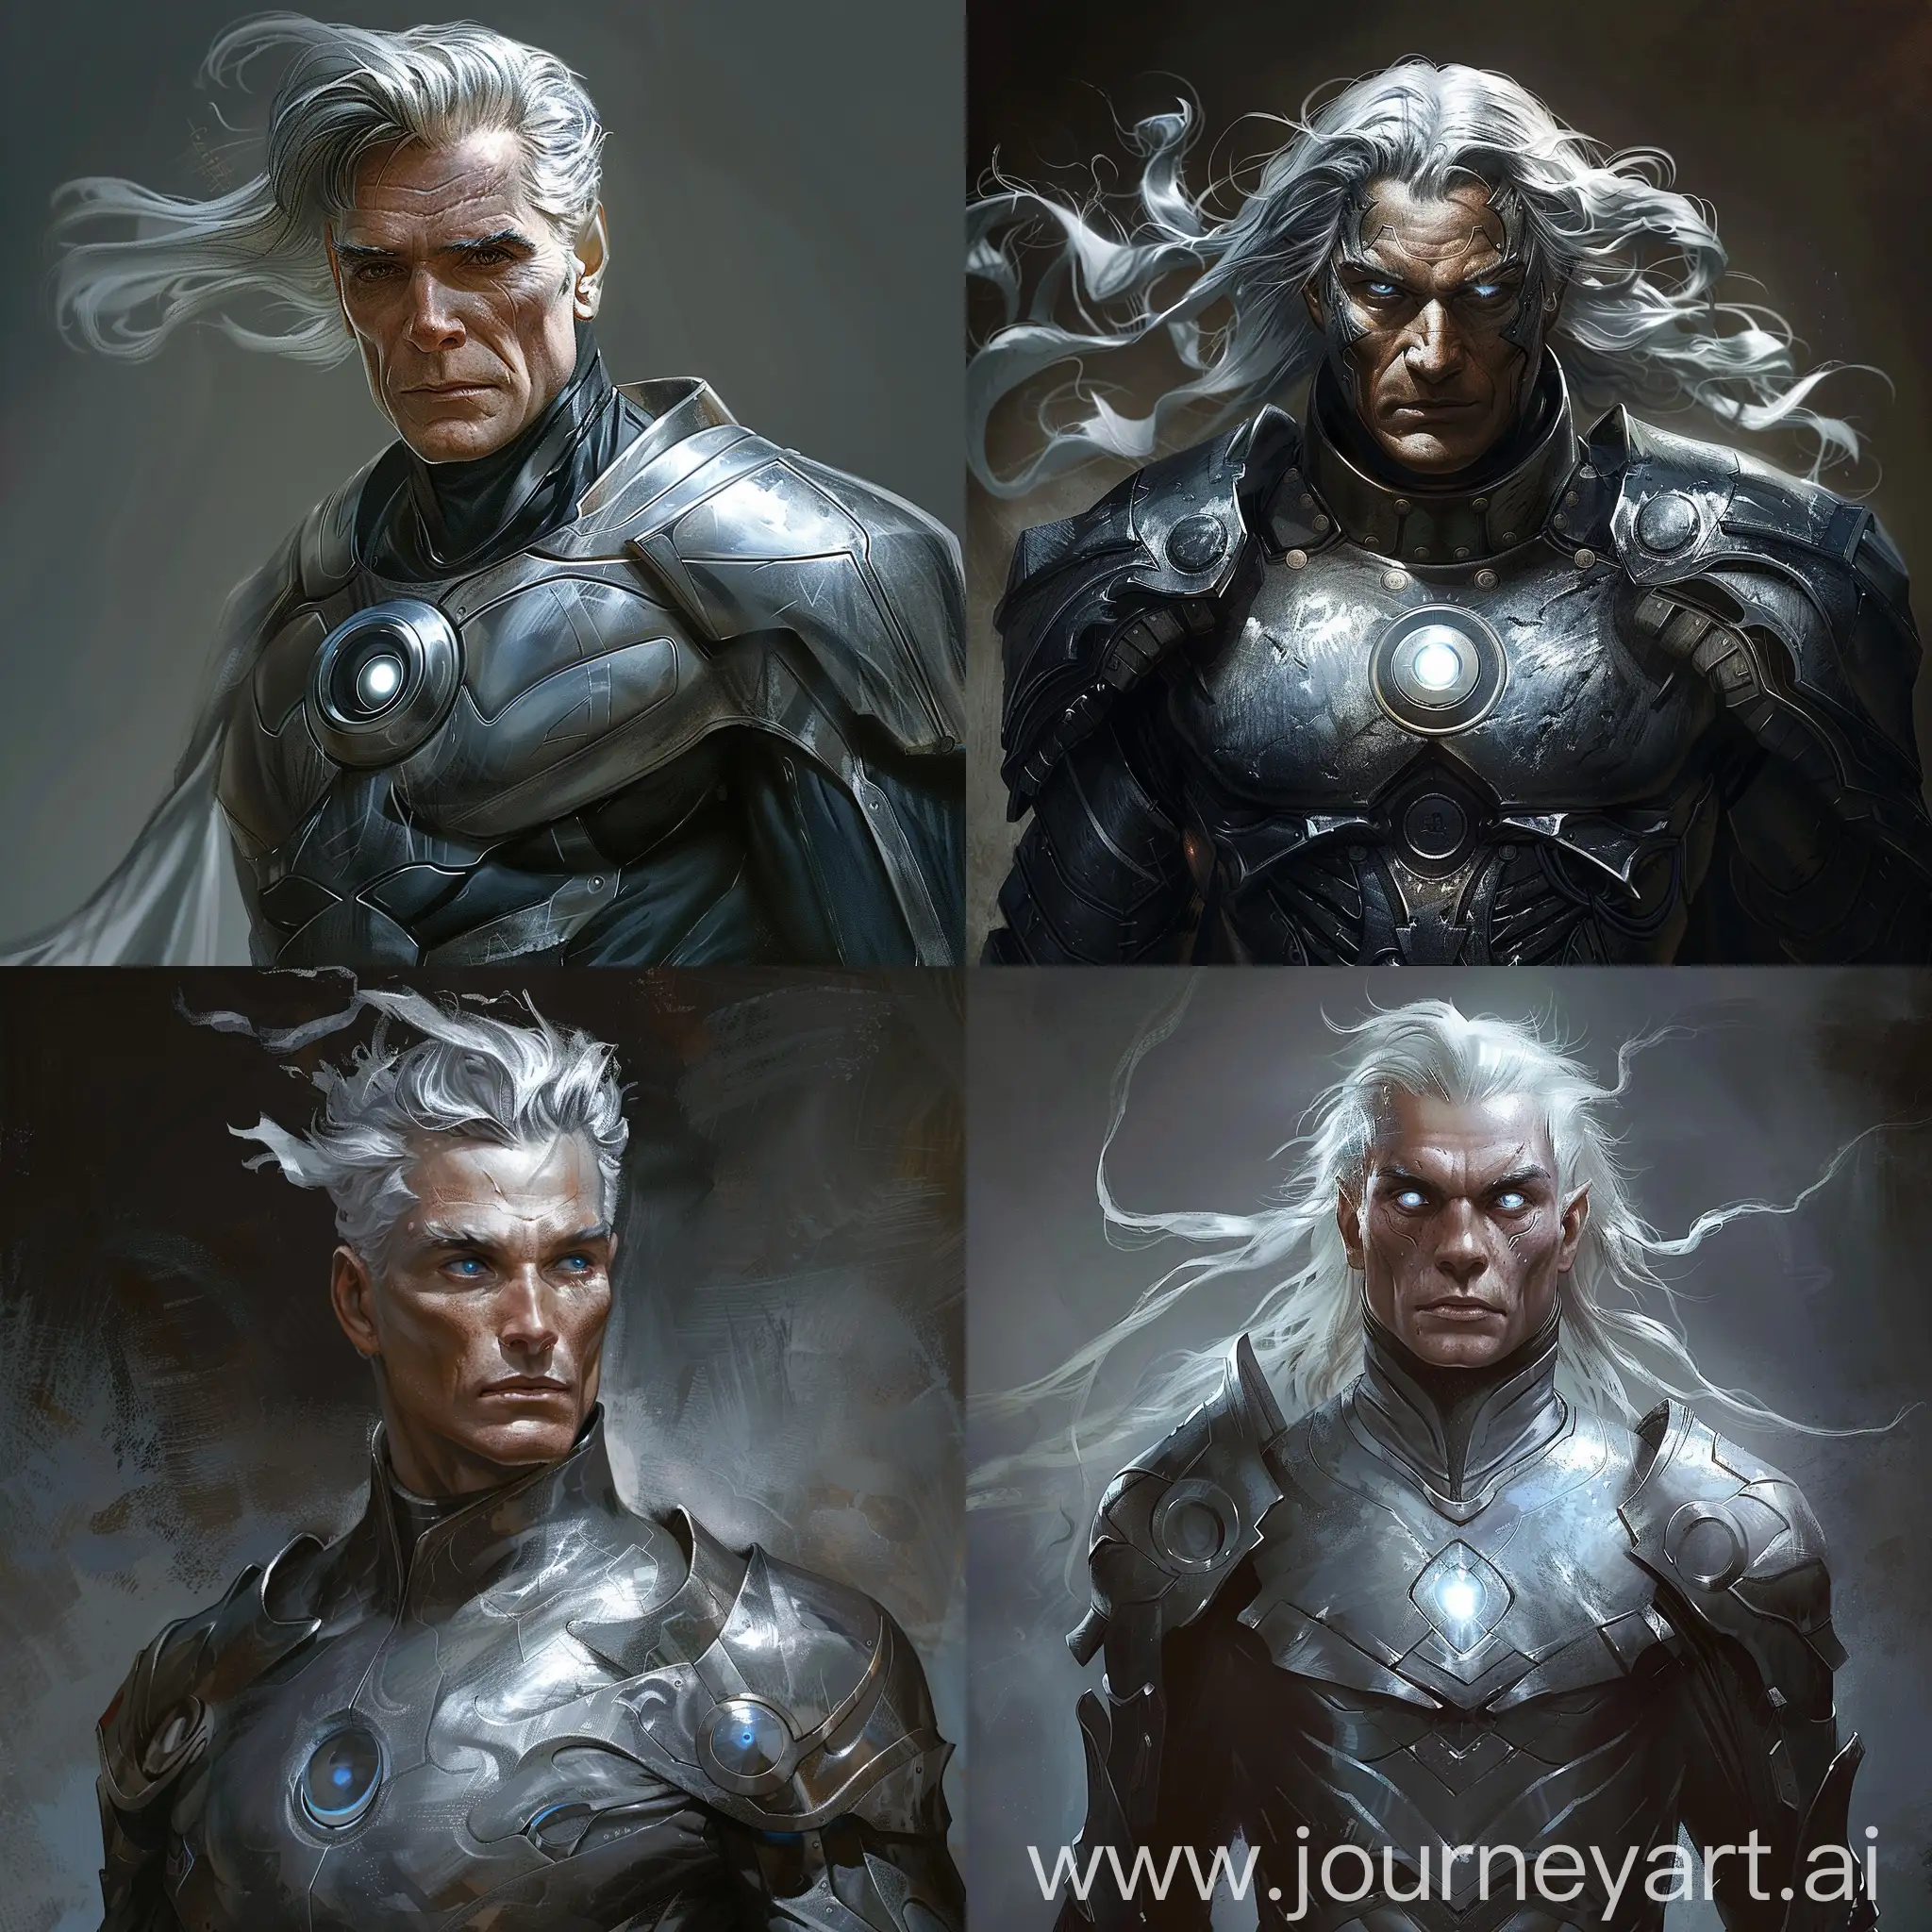 a tall and stately man with silver-gray hair that often flutters in the wind. His eyes emit a strange magnetic shine, and on his face you can always see an expression of sternness and confidence. He wears a metallic suit that emphasizes his powerful figure and also wears a helmet. His character is complex and contradictory. On the one hand, he has a deep sense of justice and is extremely radical and cruel. He has enormous strength and the ability to manipulate magnetic fields, making him one of the most dangerous enemies for his opponents. Dark fantasy, Lovecraft style, medieval, gothic